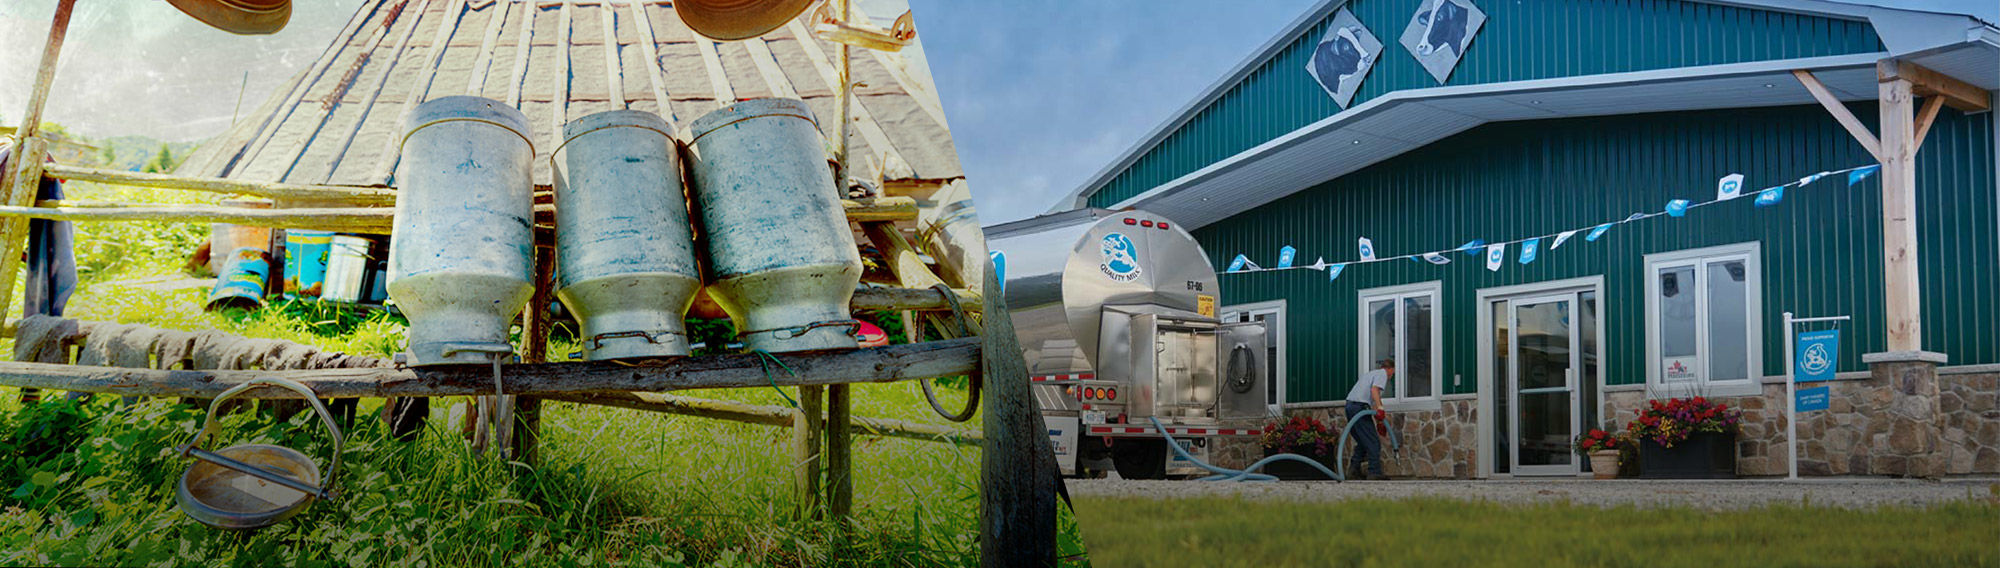 <h1>Proudly representing the interests of Ontario’s independent milk transporters</h1> <br><a target="_top" href="/About-Us.htm">More About OMTA</a>